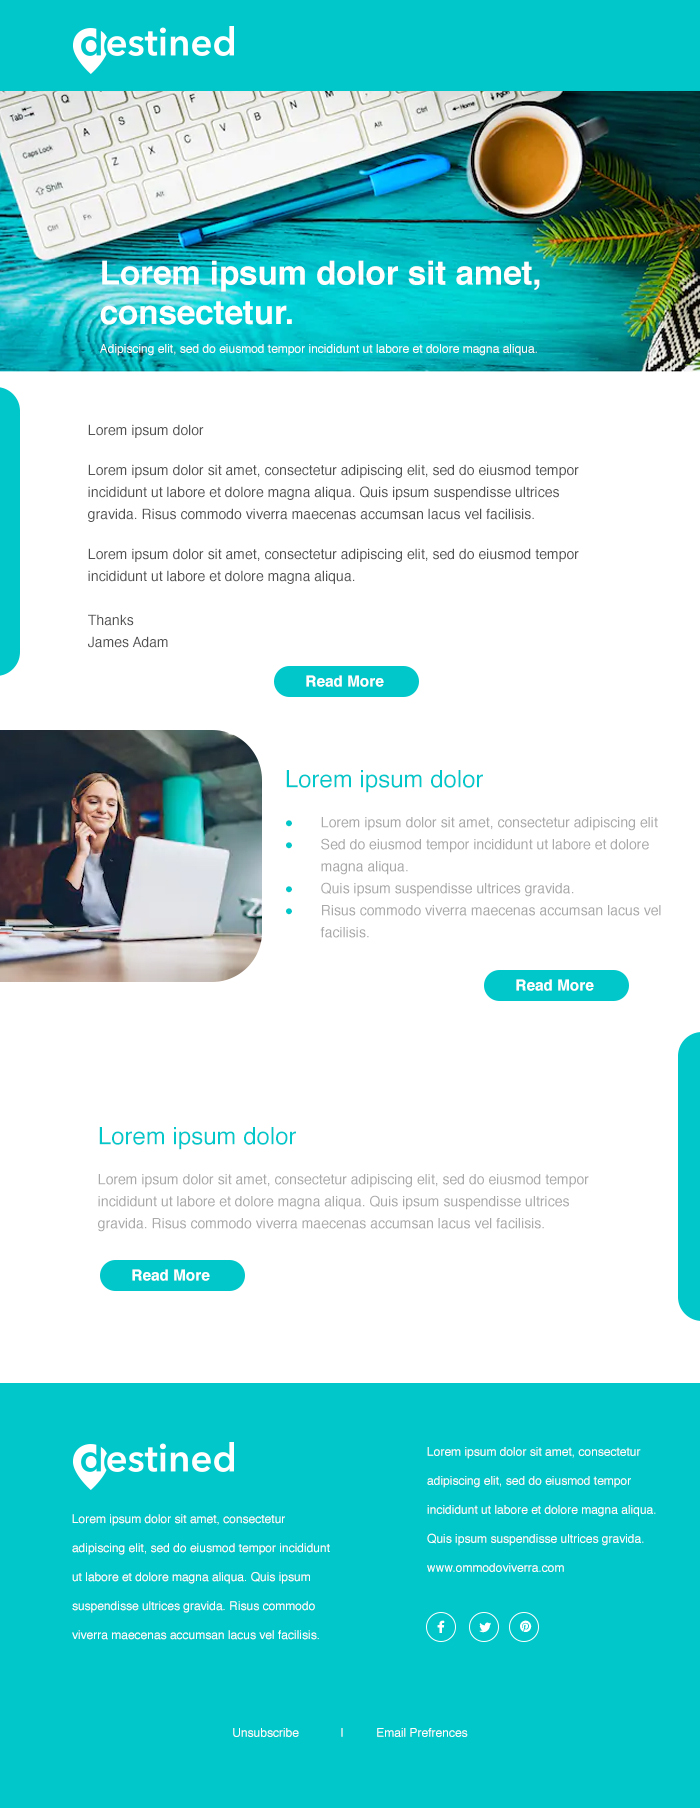 Pardot Email Templates Gallery Destined